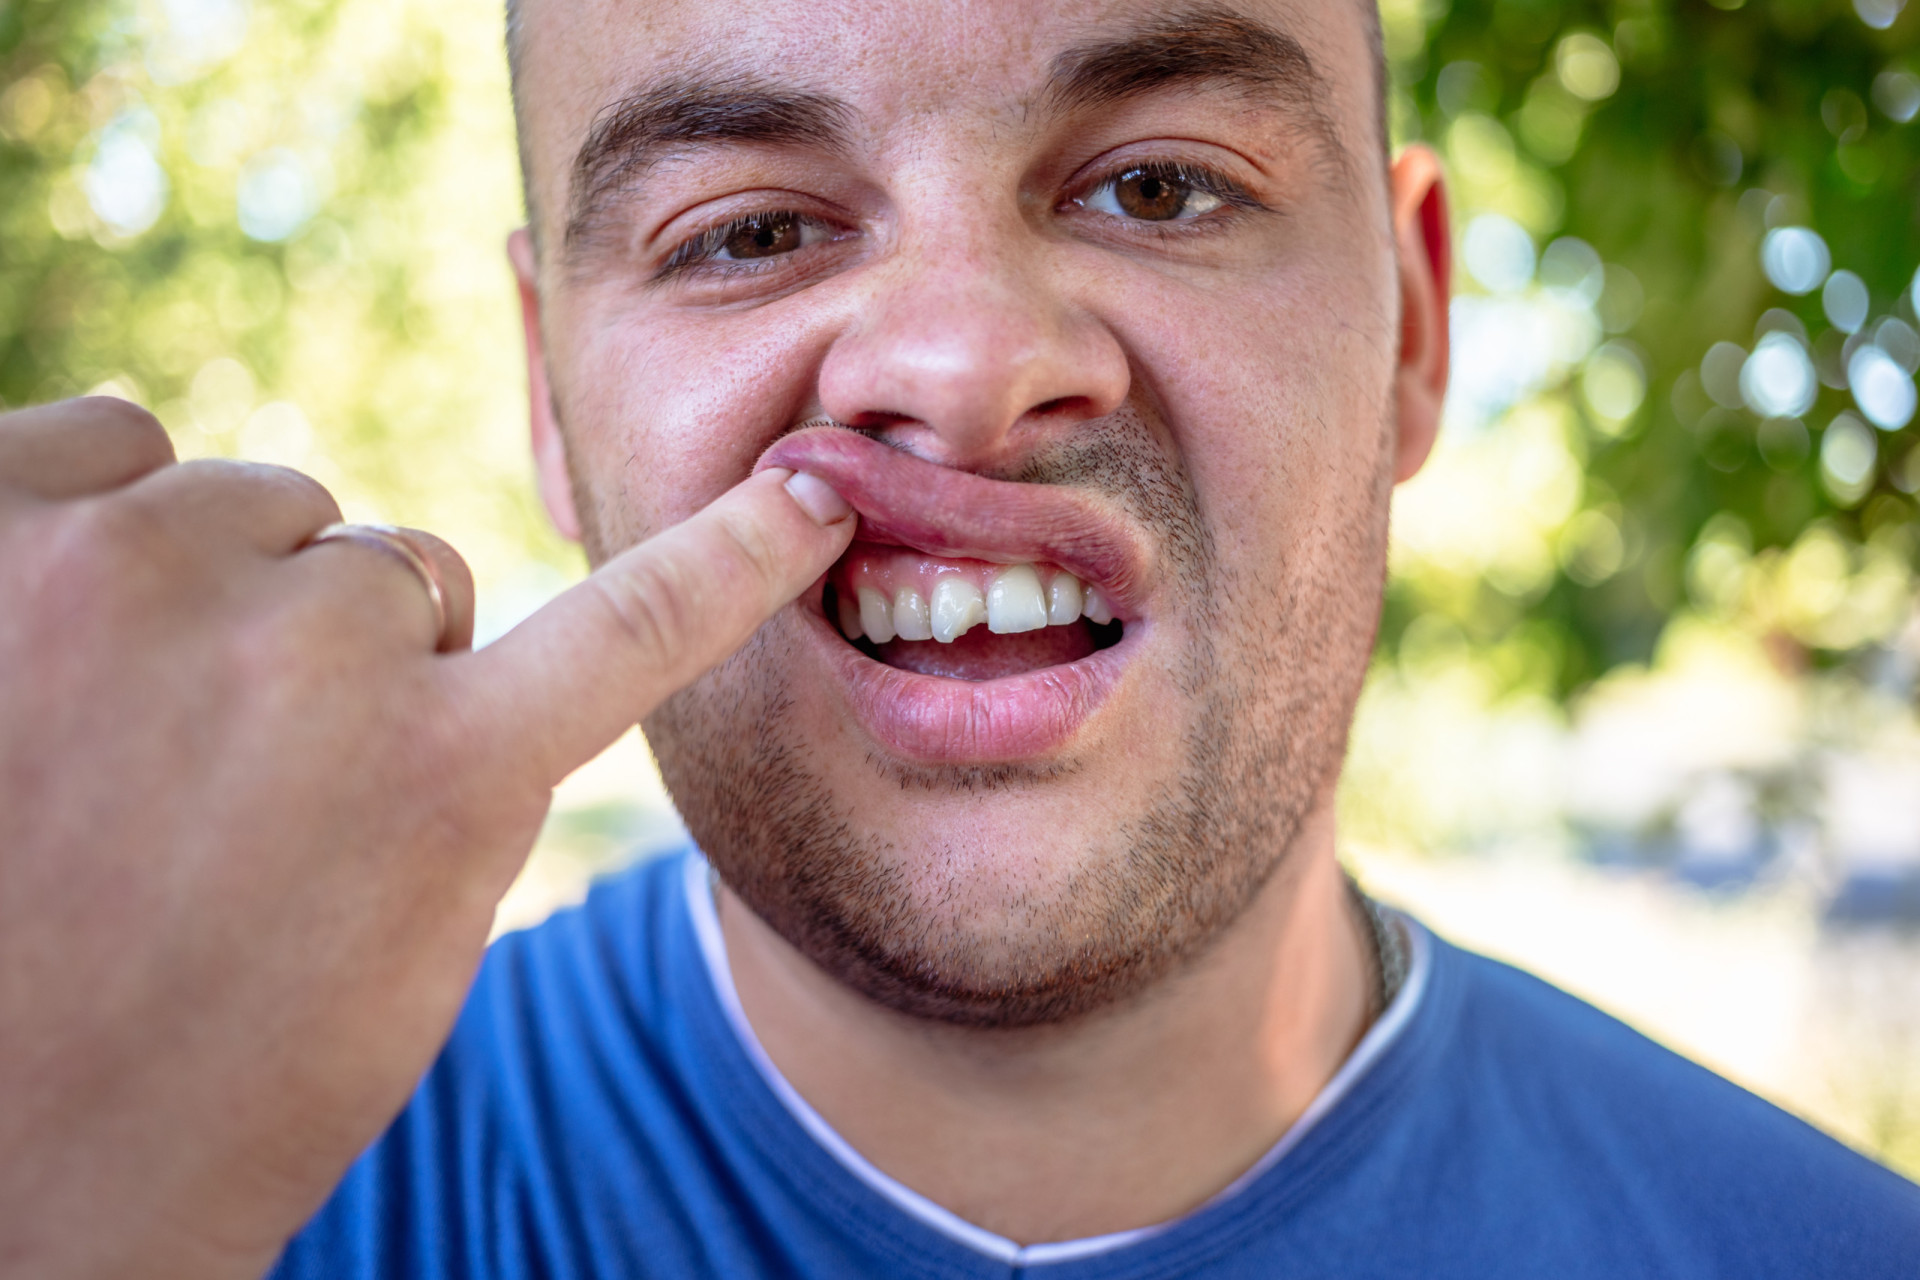 <p>Surely, you can't go to work with a chipped tooth, right? Especially after being assaulted by your loved one!</p><p><a href="https://www.msn.com/en-us/community/channel/vid-7xx8mnucu55yw63we9va2gwr7uihbxwc68fxqp25x6tg4ftibpra?cvid=94631541bc0f4f89bfd59158d696ad7e">Follow us and access great exclusive content every day</a></p>